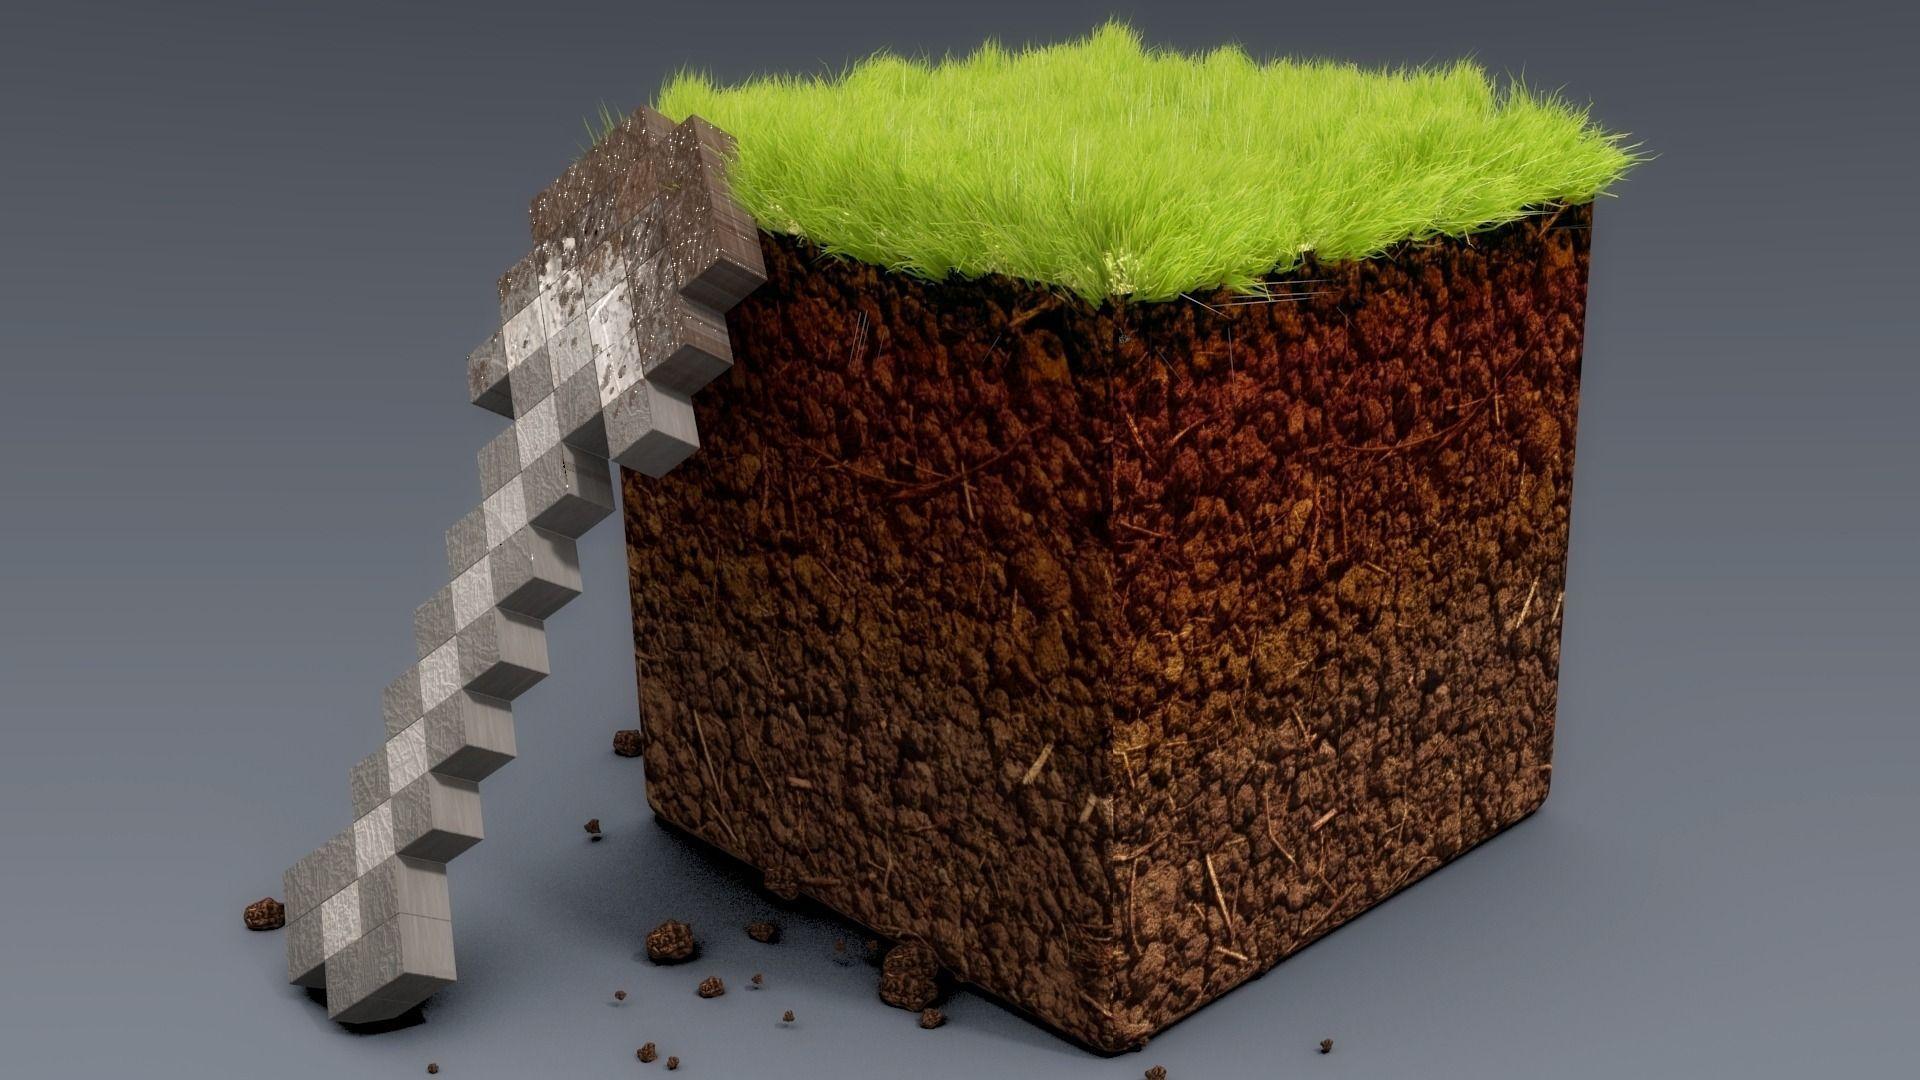 Wallpapers For > Hd Wallpapers 1080p Minecraft